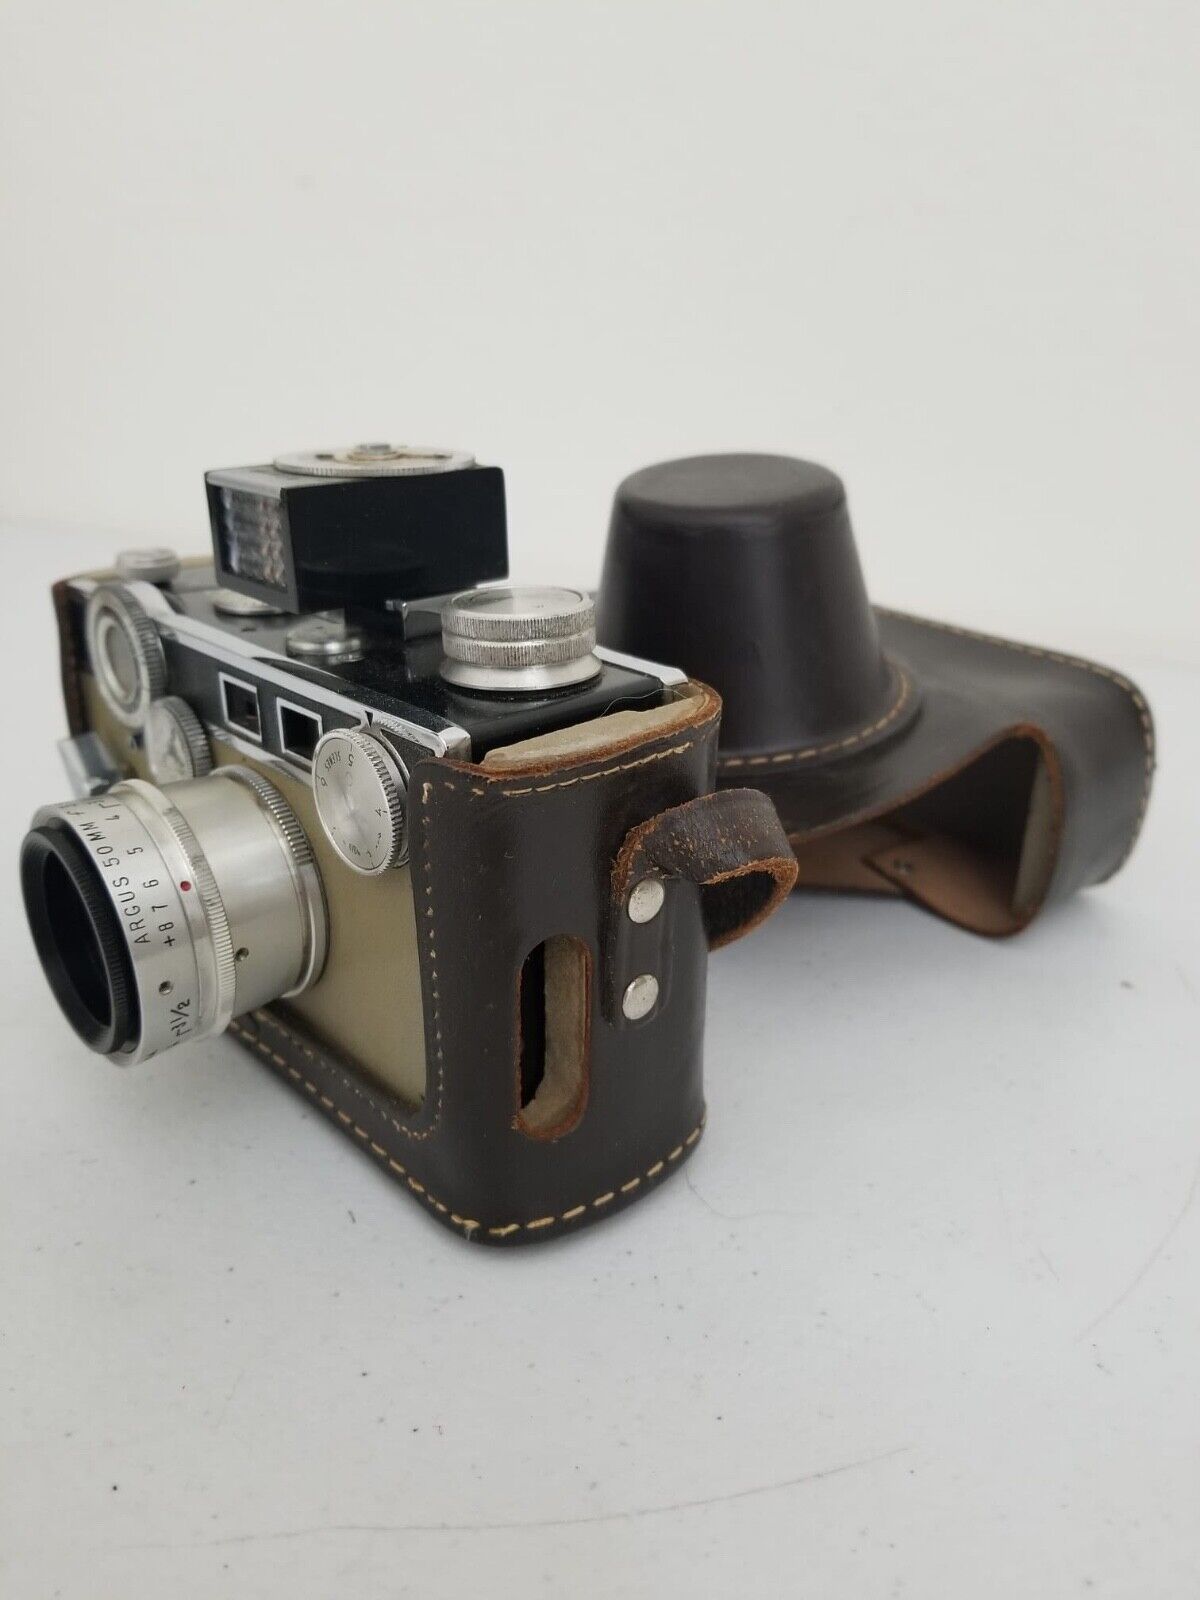 Vintage Argus C3 Match-Matic Rangefinder Camera Kit with Leather Case & Manual - Iconic Mid-Century Photography Collectible - TreasuTiques